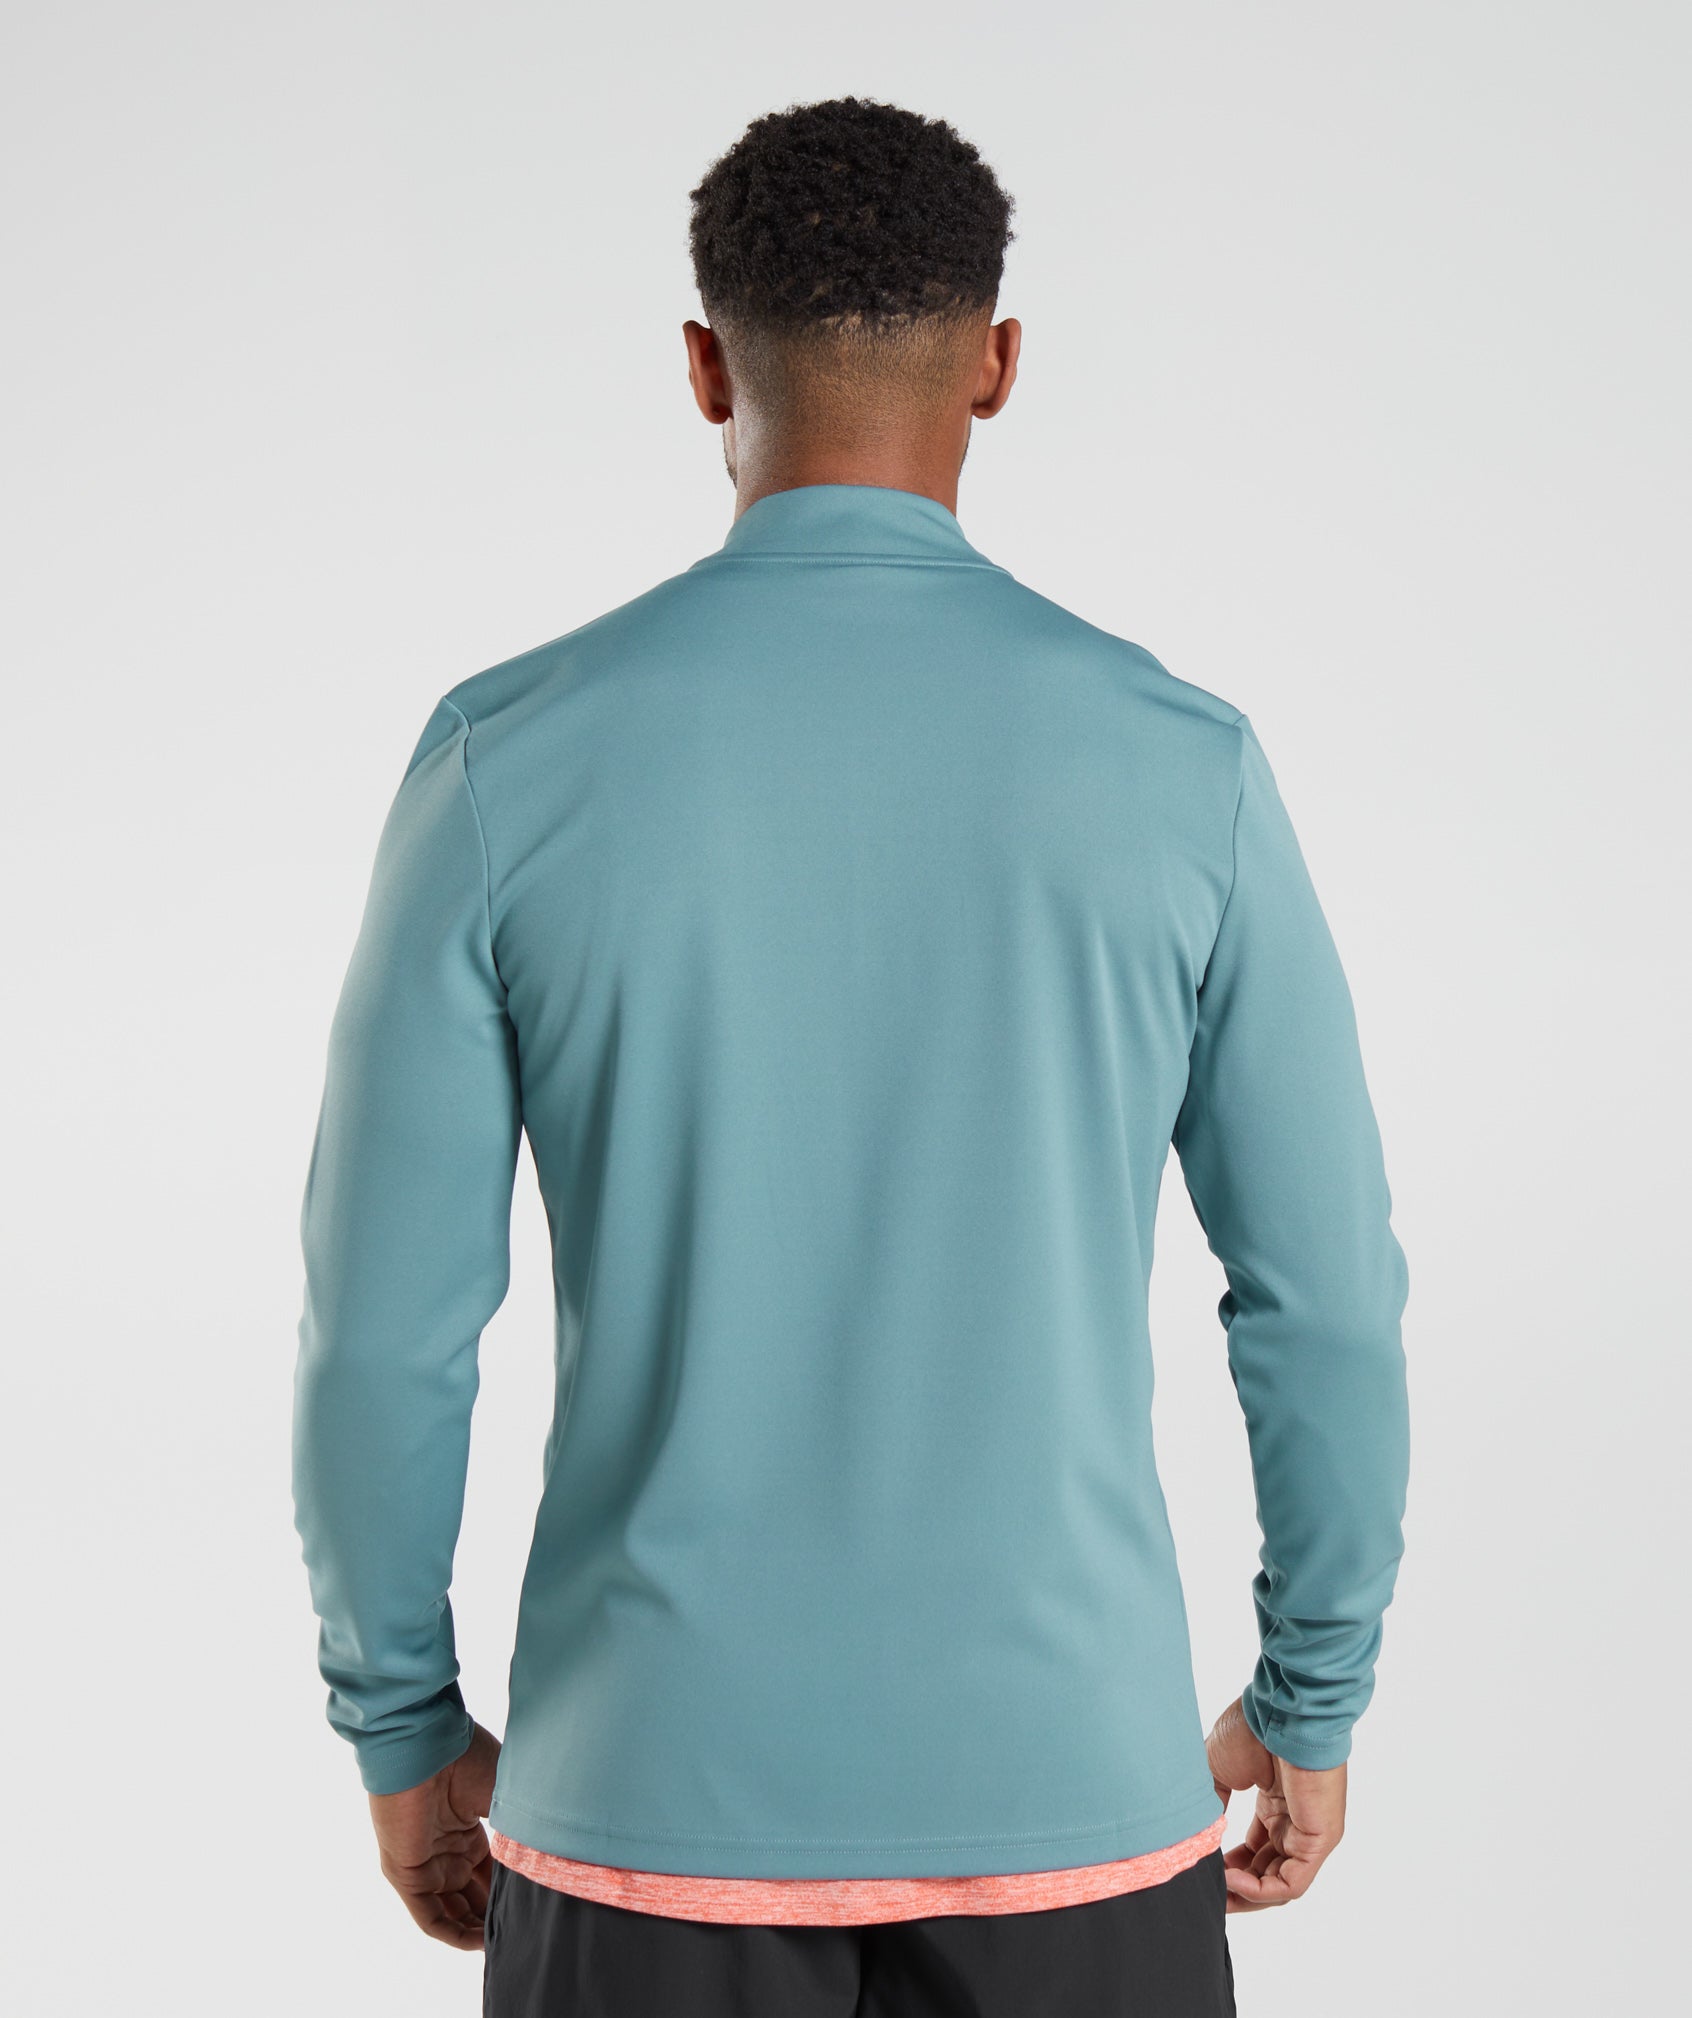 Arrival 1/4 Zip in Thunder Blue - view 2